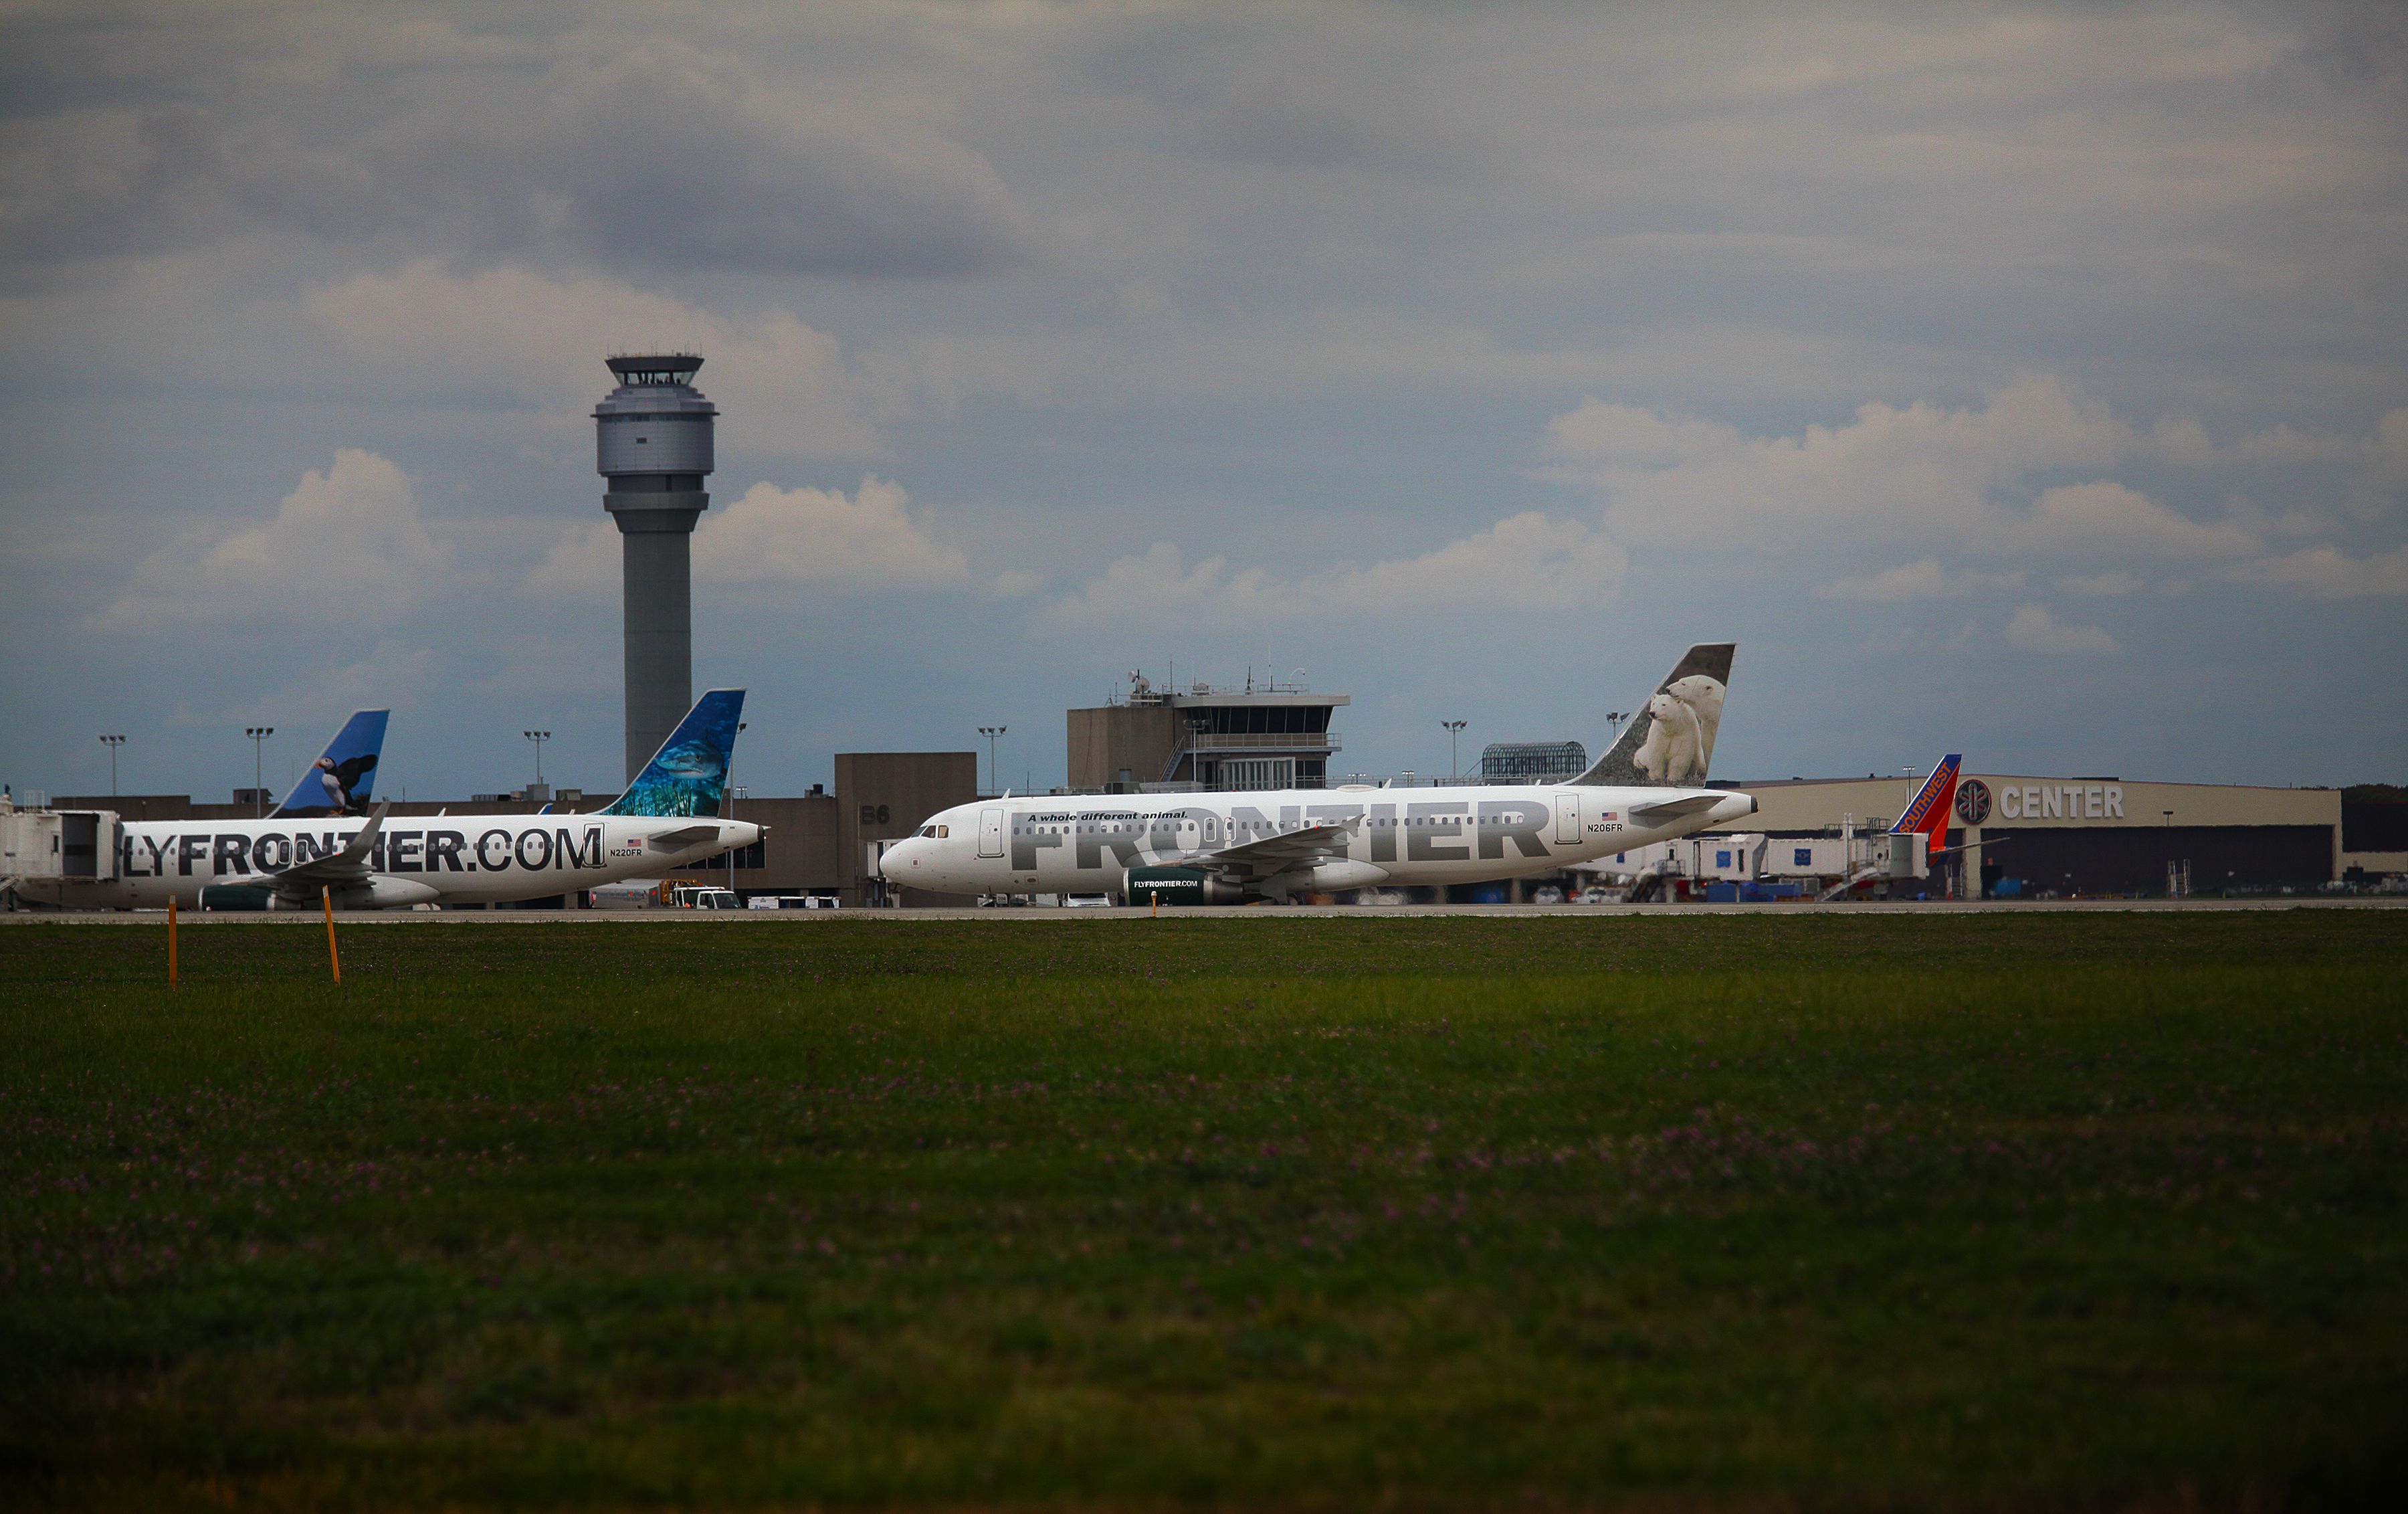 GettyImages-457276660 -  A Frontier Airlines plane taxis the runway at Cleveland Hopkins Airport on October 15, 2014